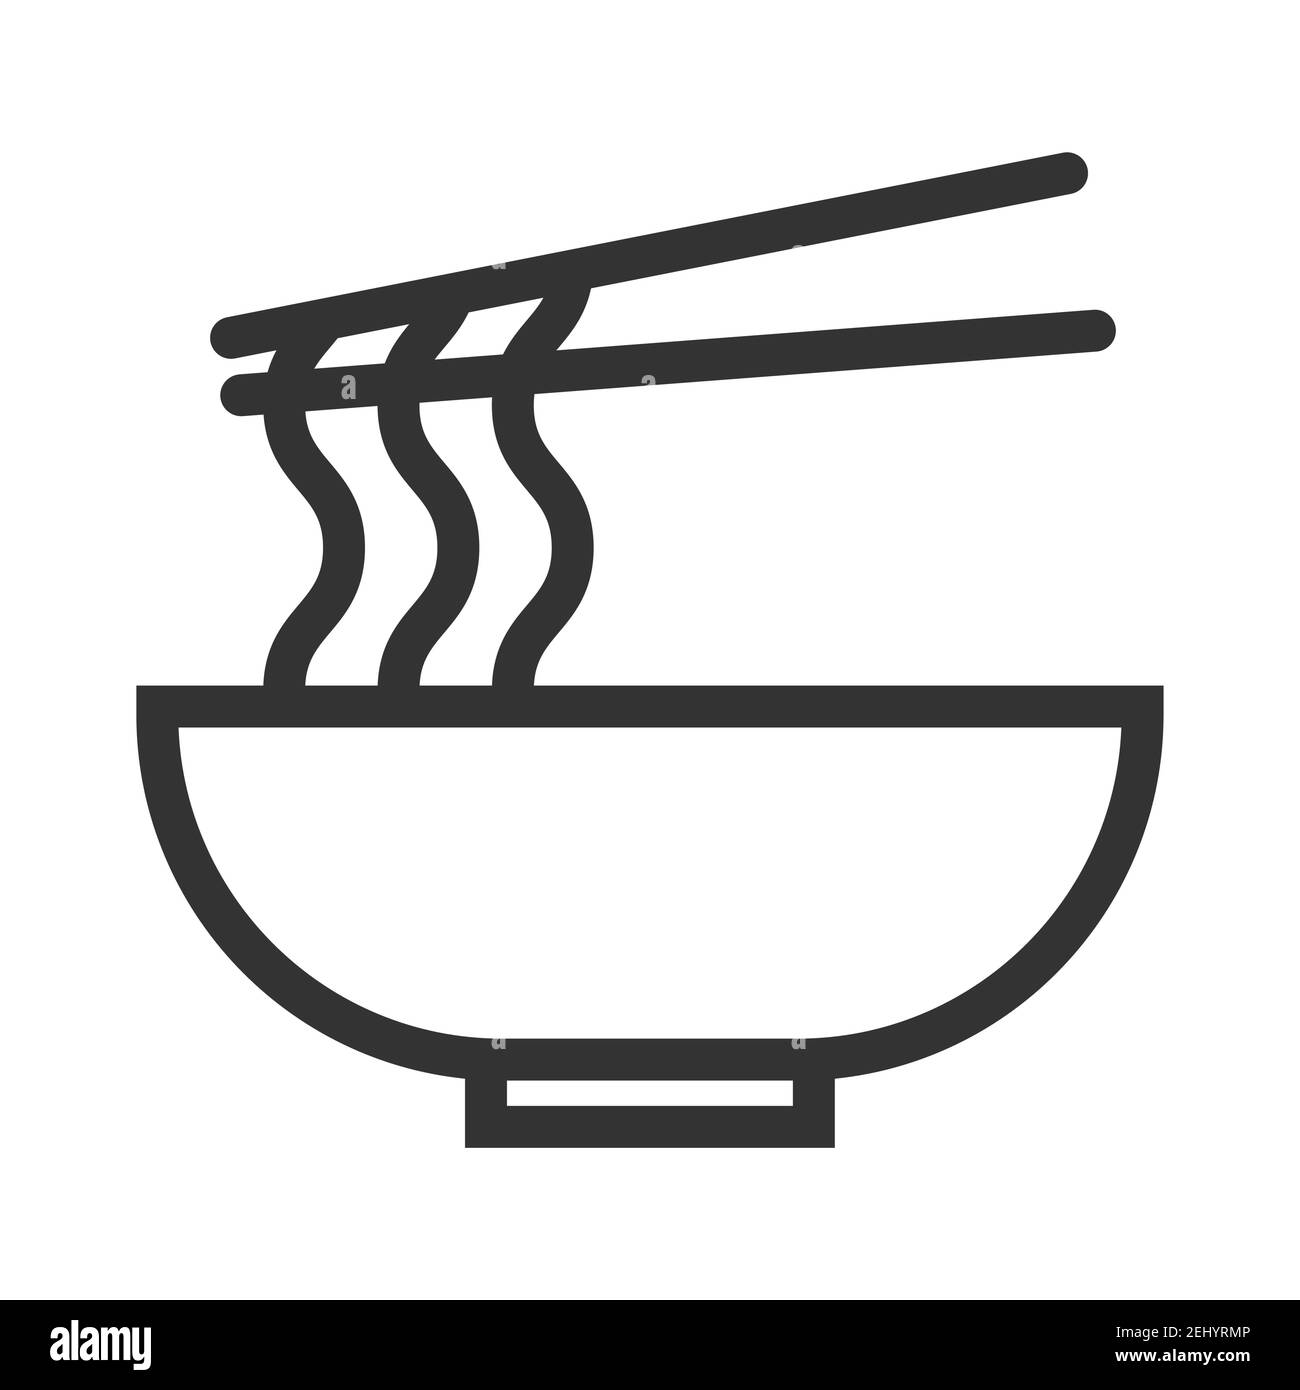 Asian food in plate with chopsticks: noodles, spices. Simple food icon in trendy line style isolated on white background for web apps and mobile conce Stock Vector